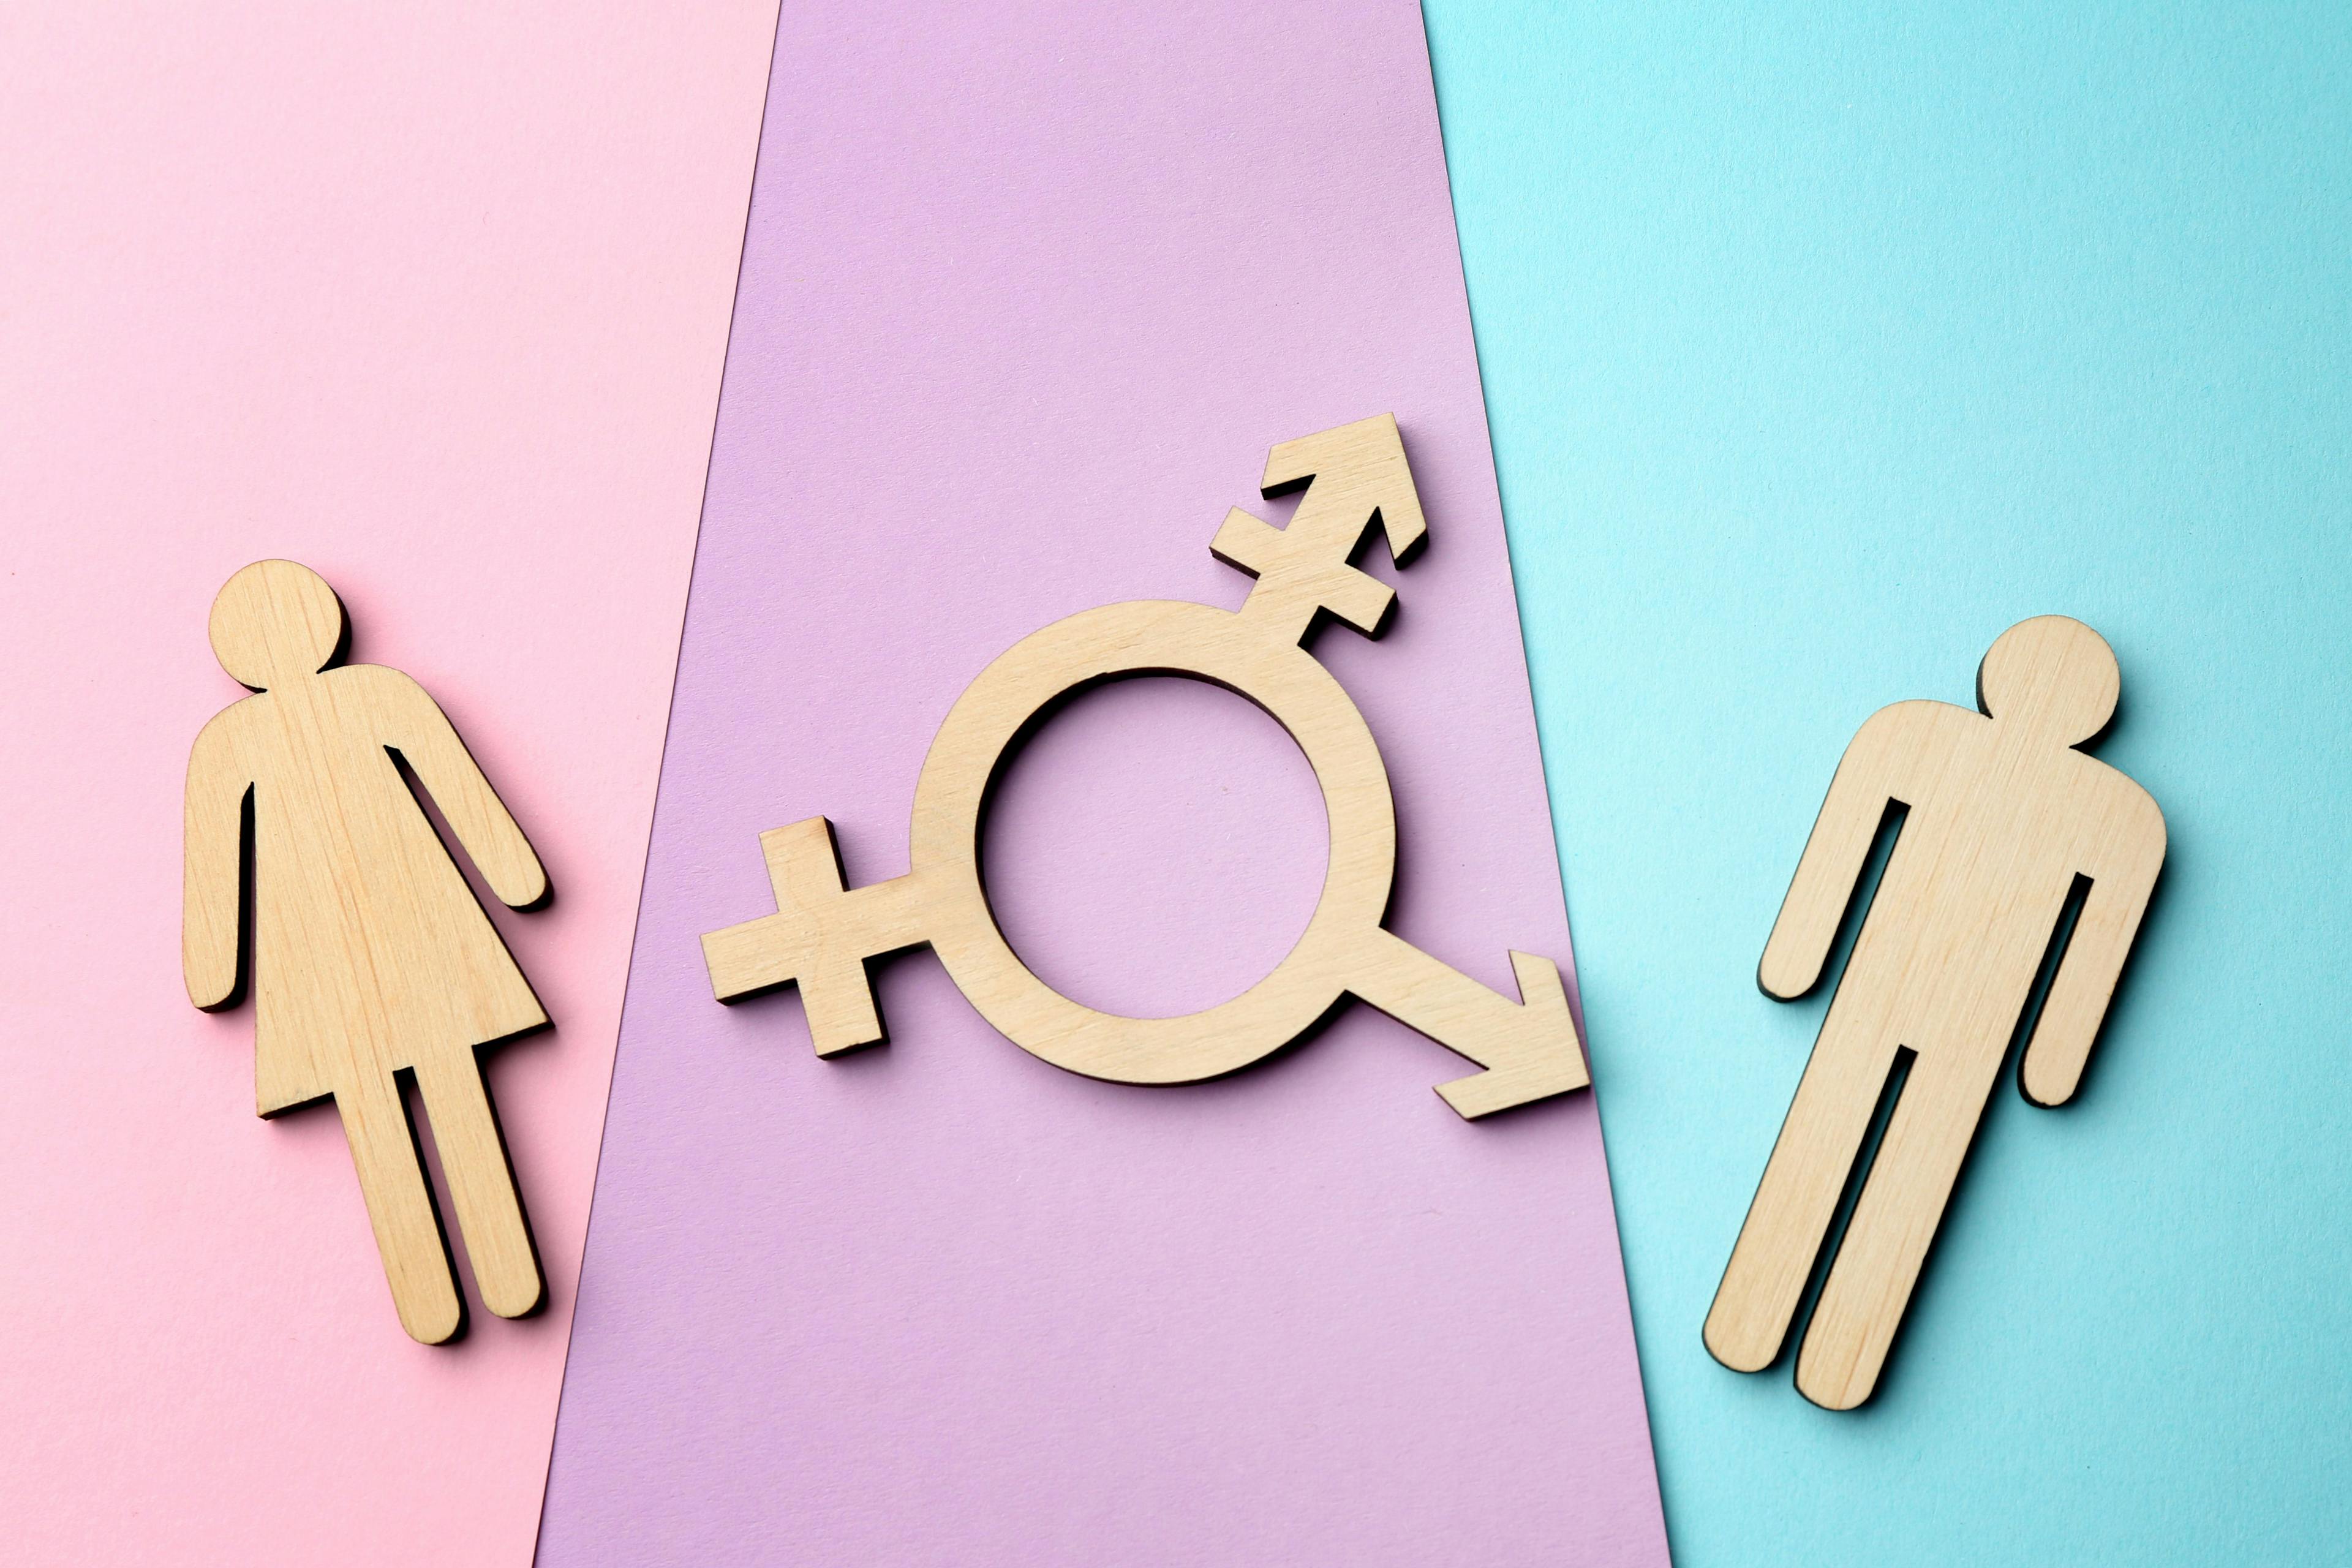 Improvements in Research Needed for Reproductive Health of Transgender and Gender Diverse People